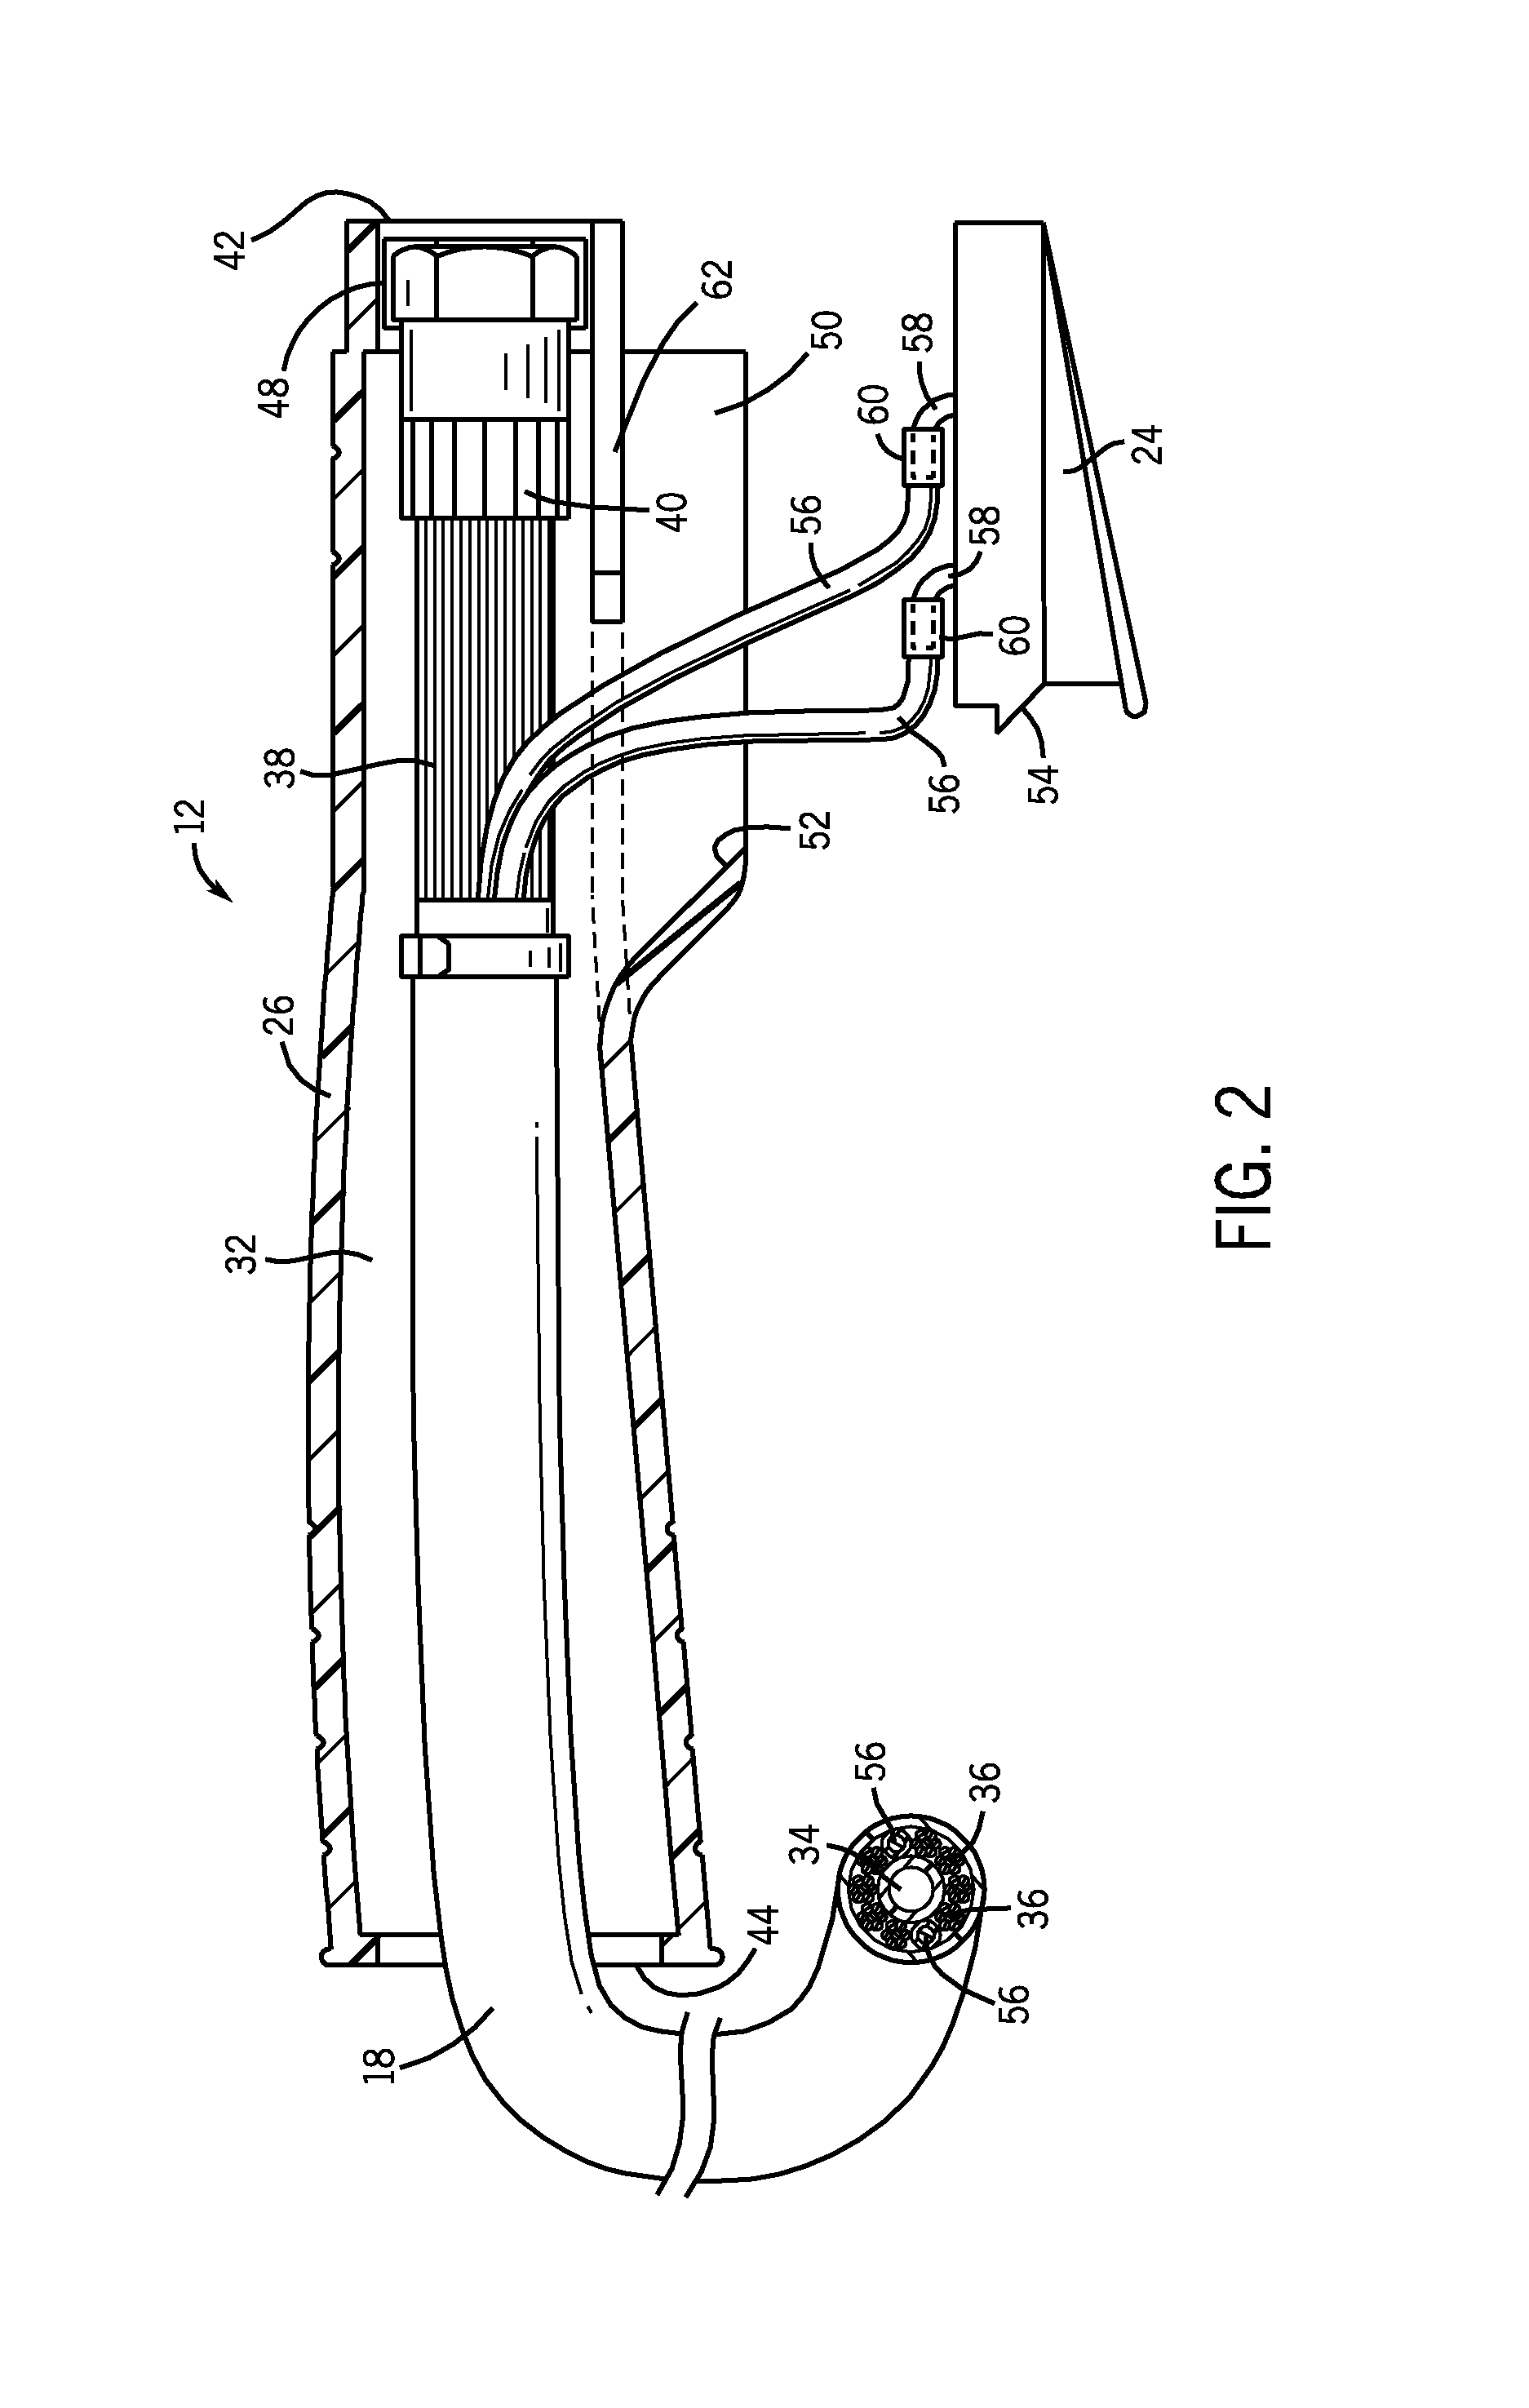 Welding torch handle utilizing slot for trigger attachment